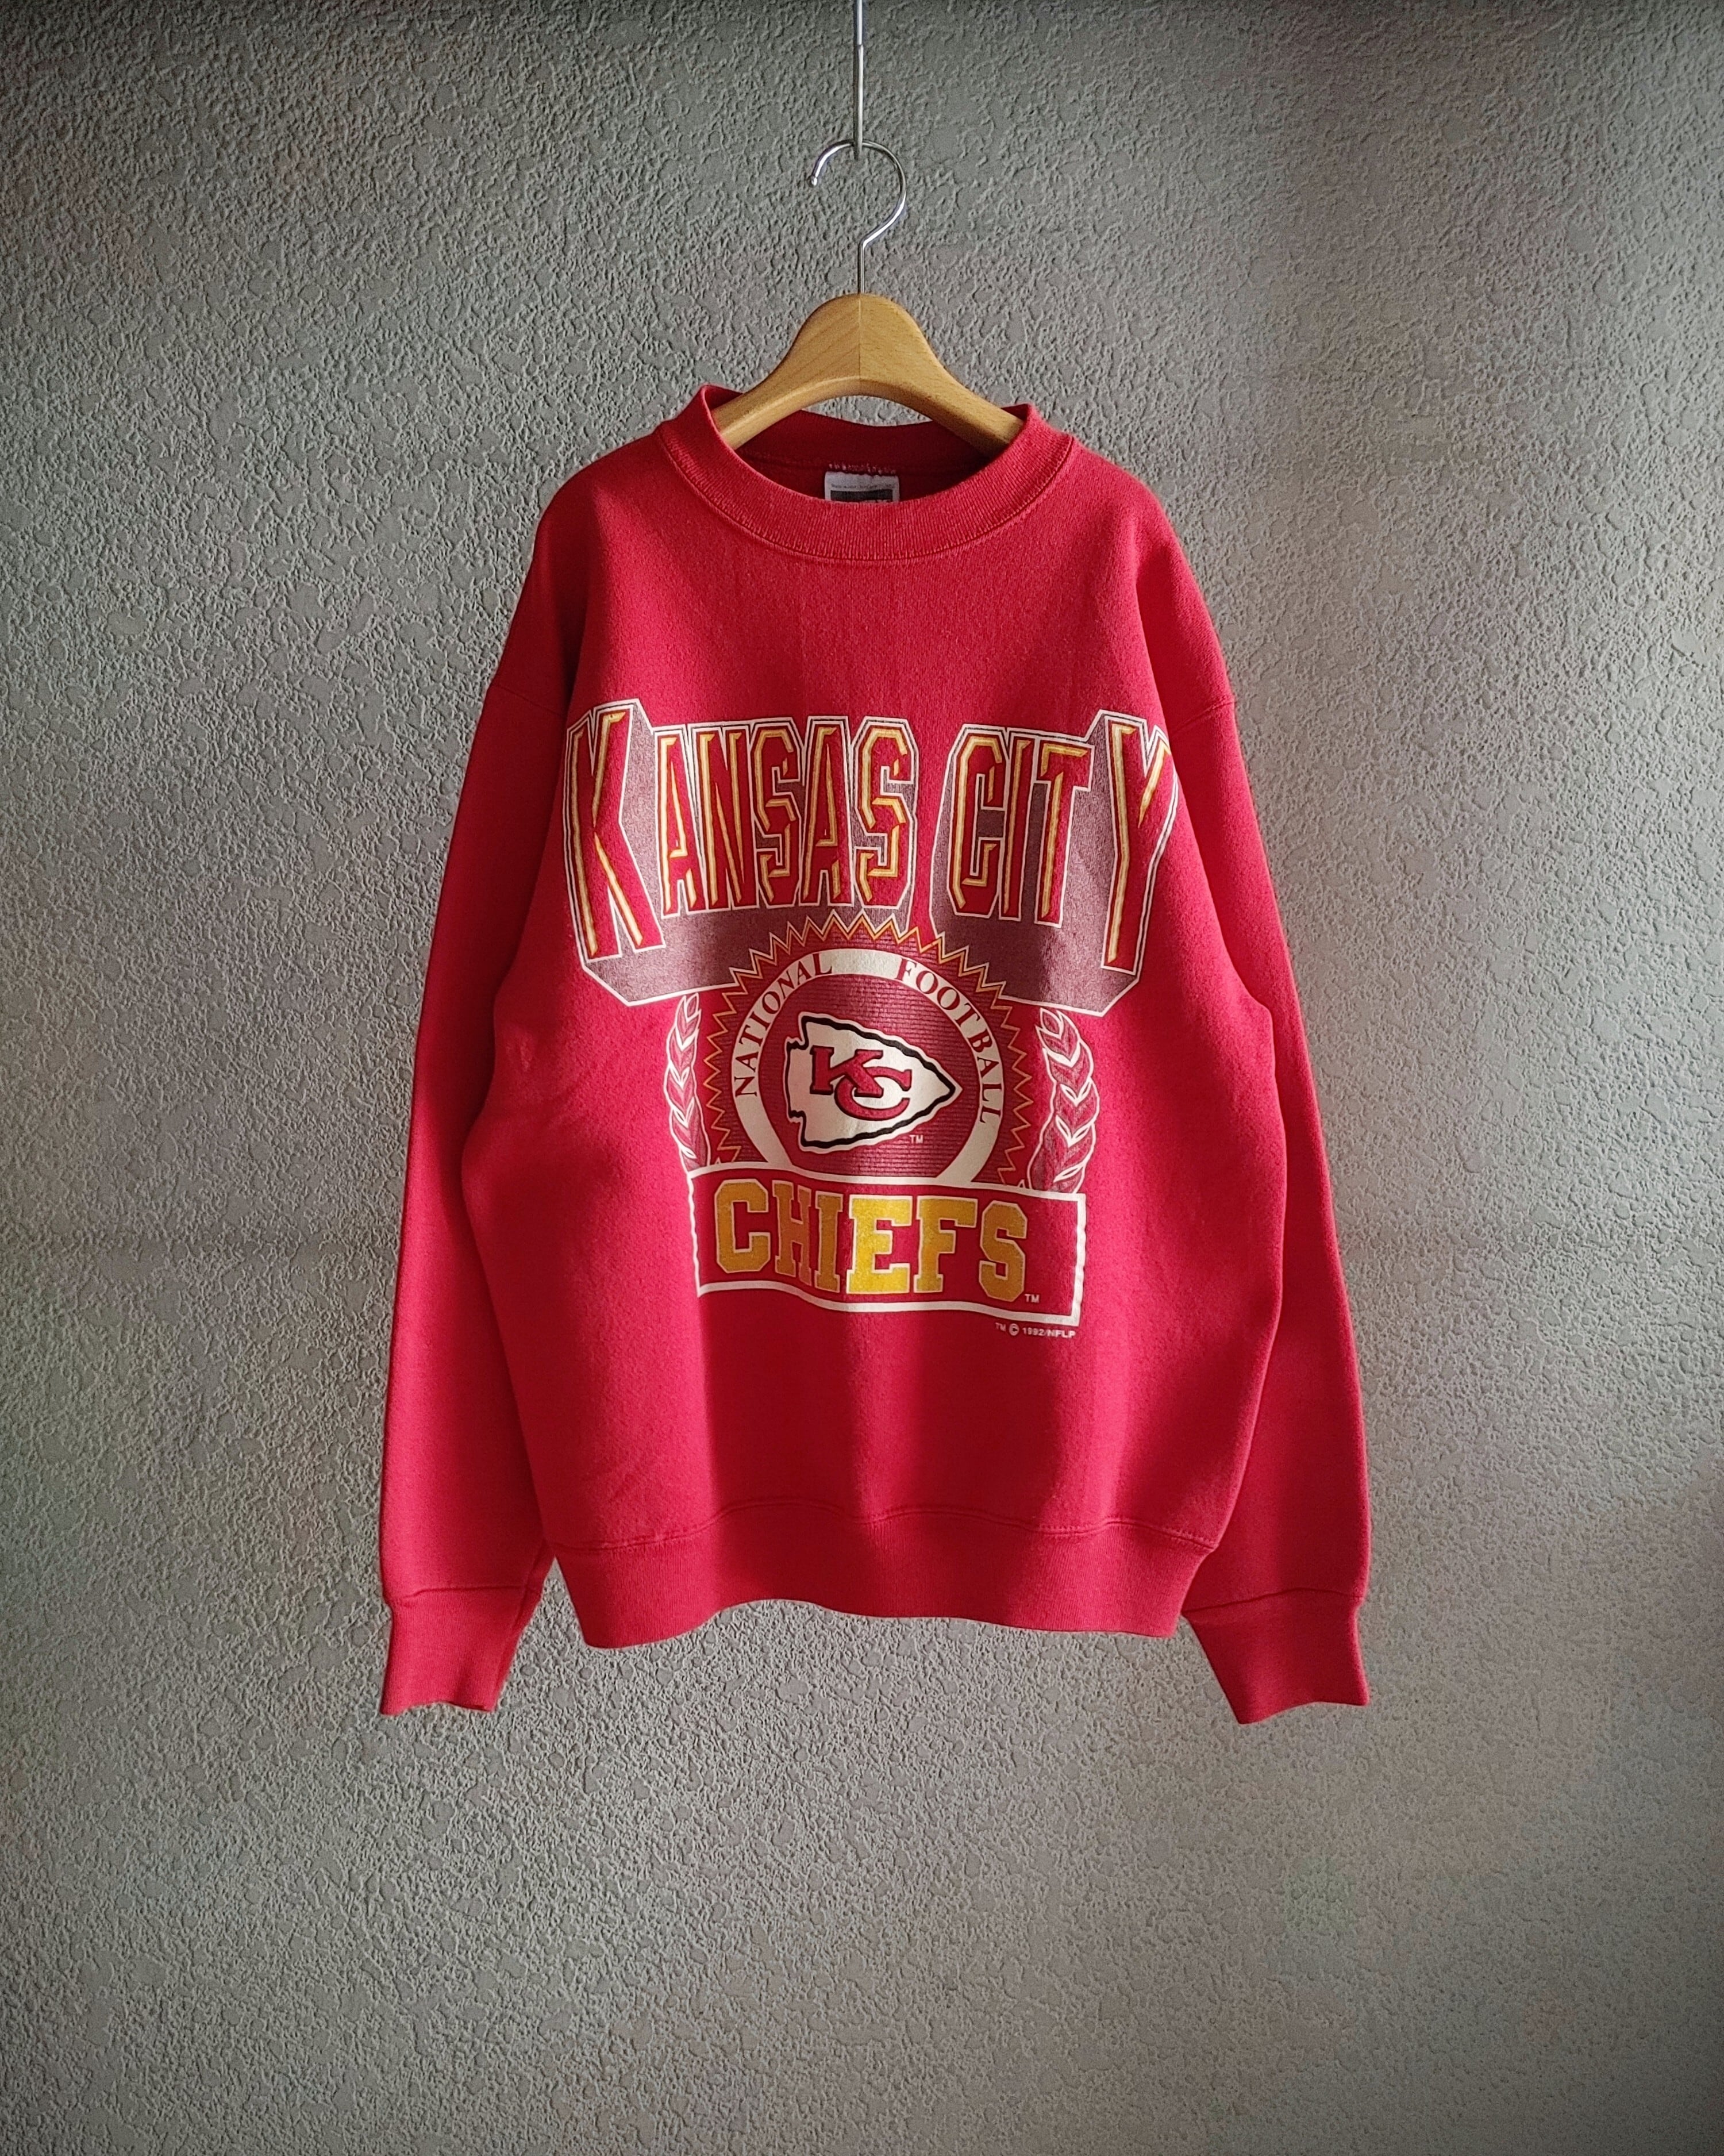 NFL KANSAS CITY CHIEFS スウェット カンザスシティチーフス 90's TULTEX アメリカ製 古着 ビンテージ Made in  USA | Dron-pa -古着屋- powered by BASE